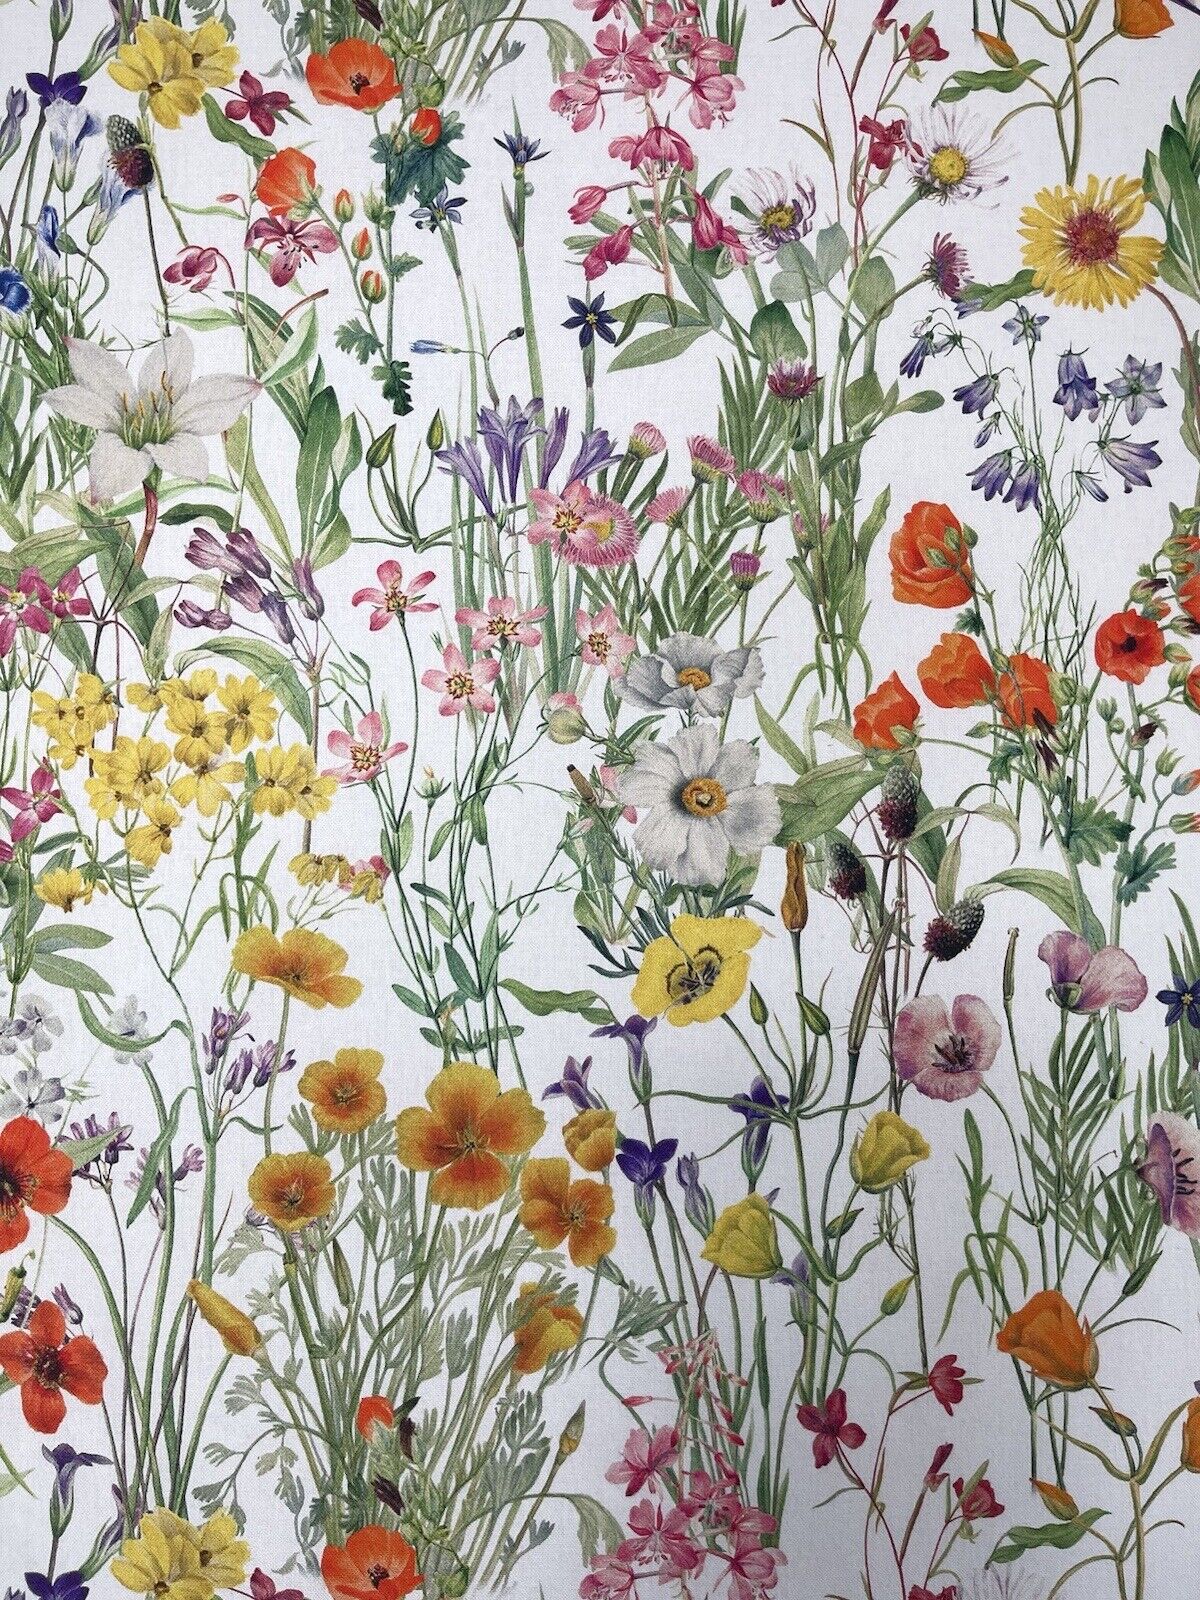 Summer Flowers Fields Cotton Fabric by Meter Botanical Floral Sewing Material By Yards Meters Poppy Print Textile Country Style Canvas For Pillows